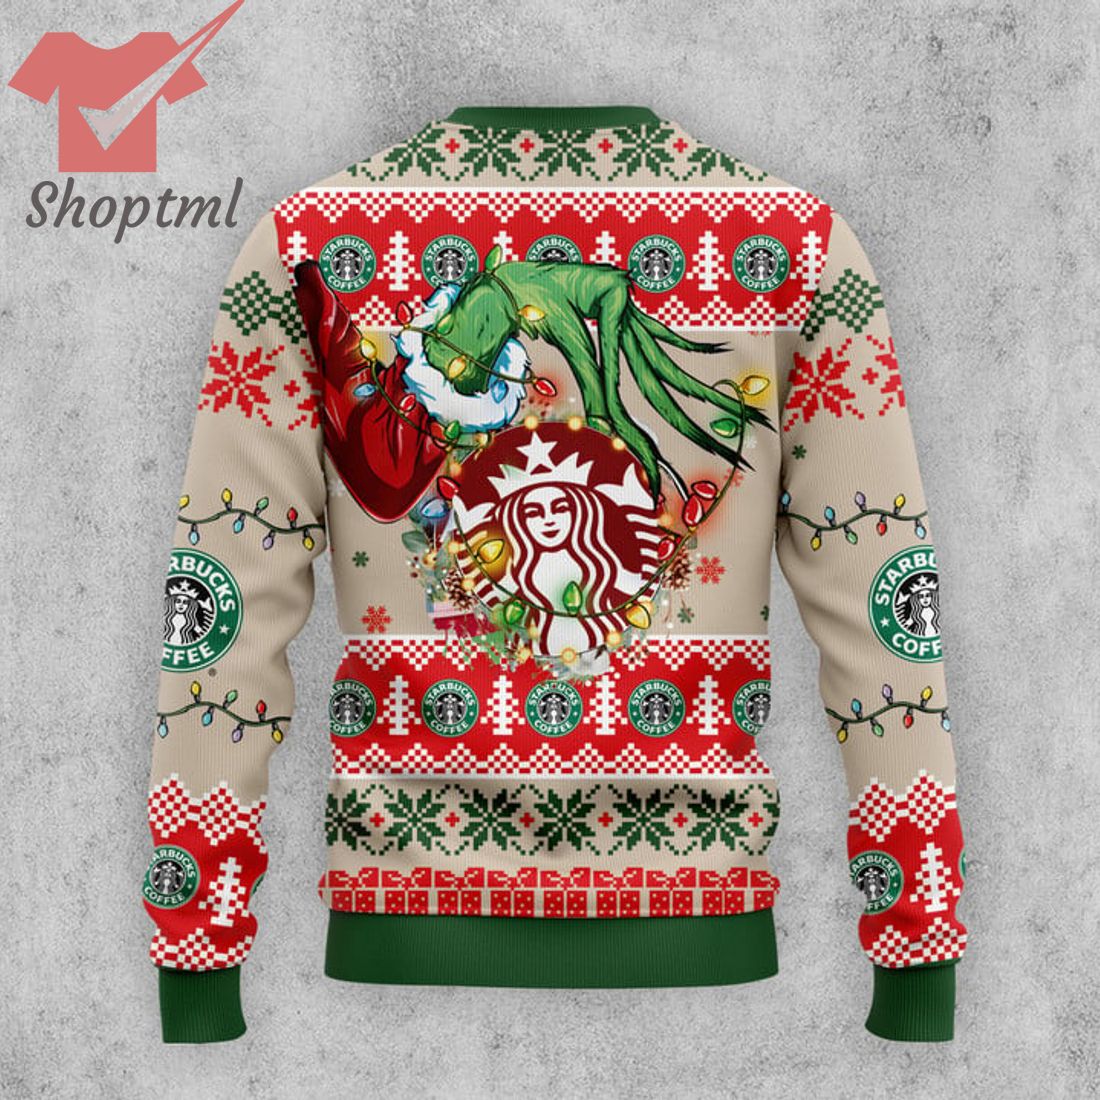 Starbucks x The Grinch Ugly Christmas Sweater